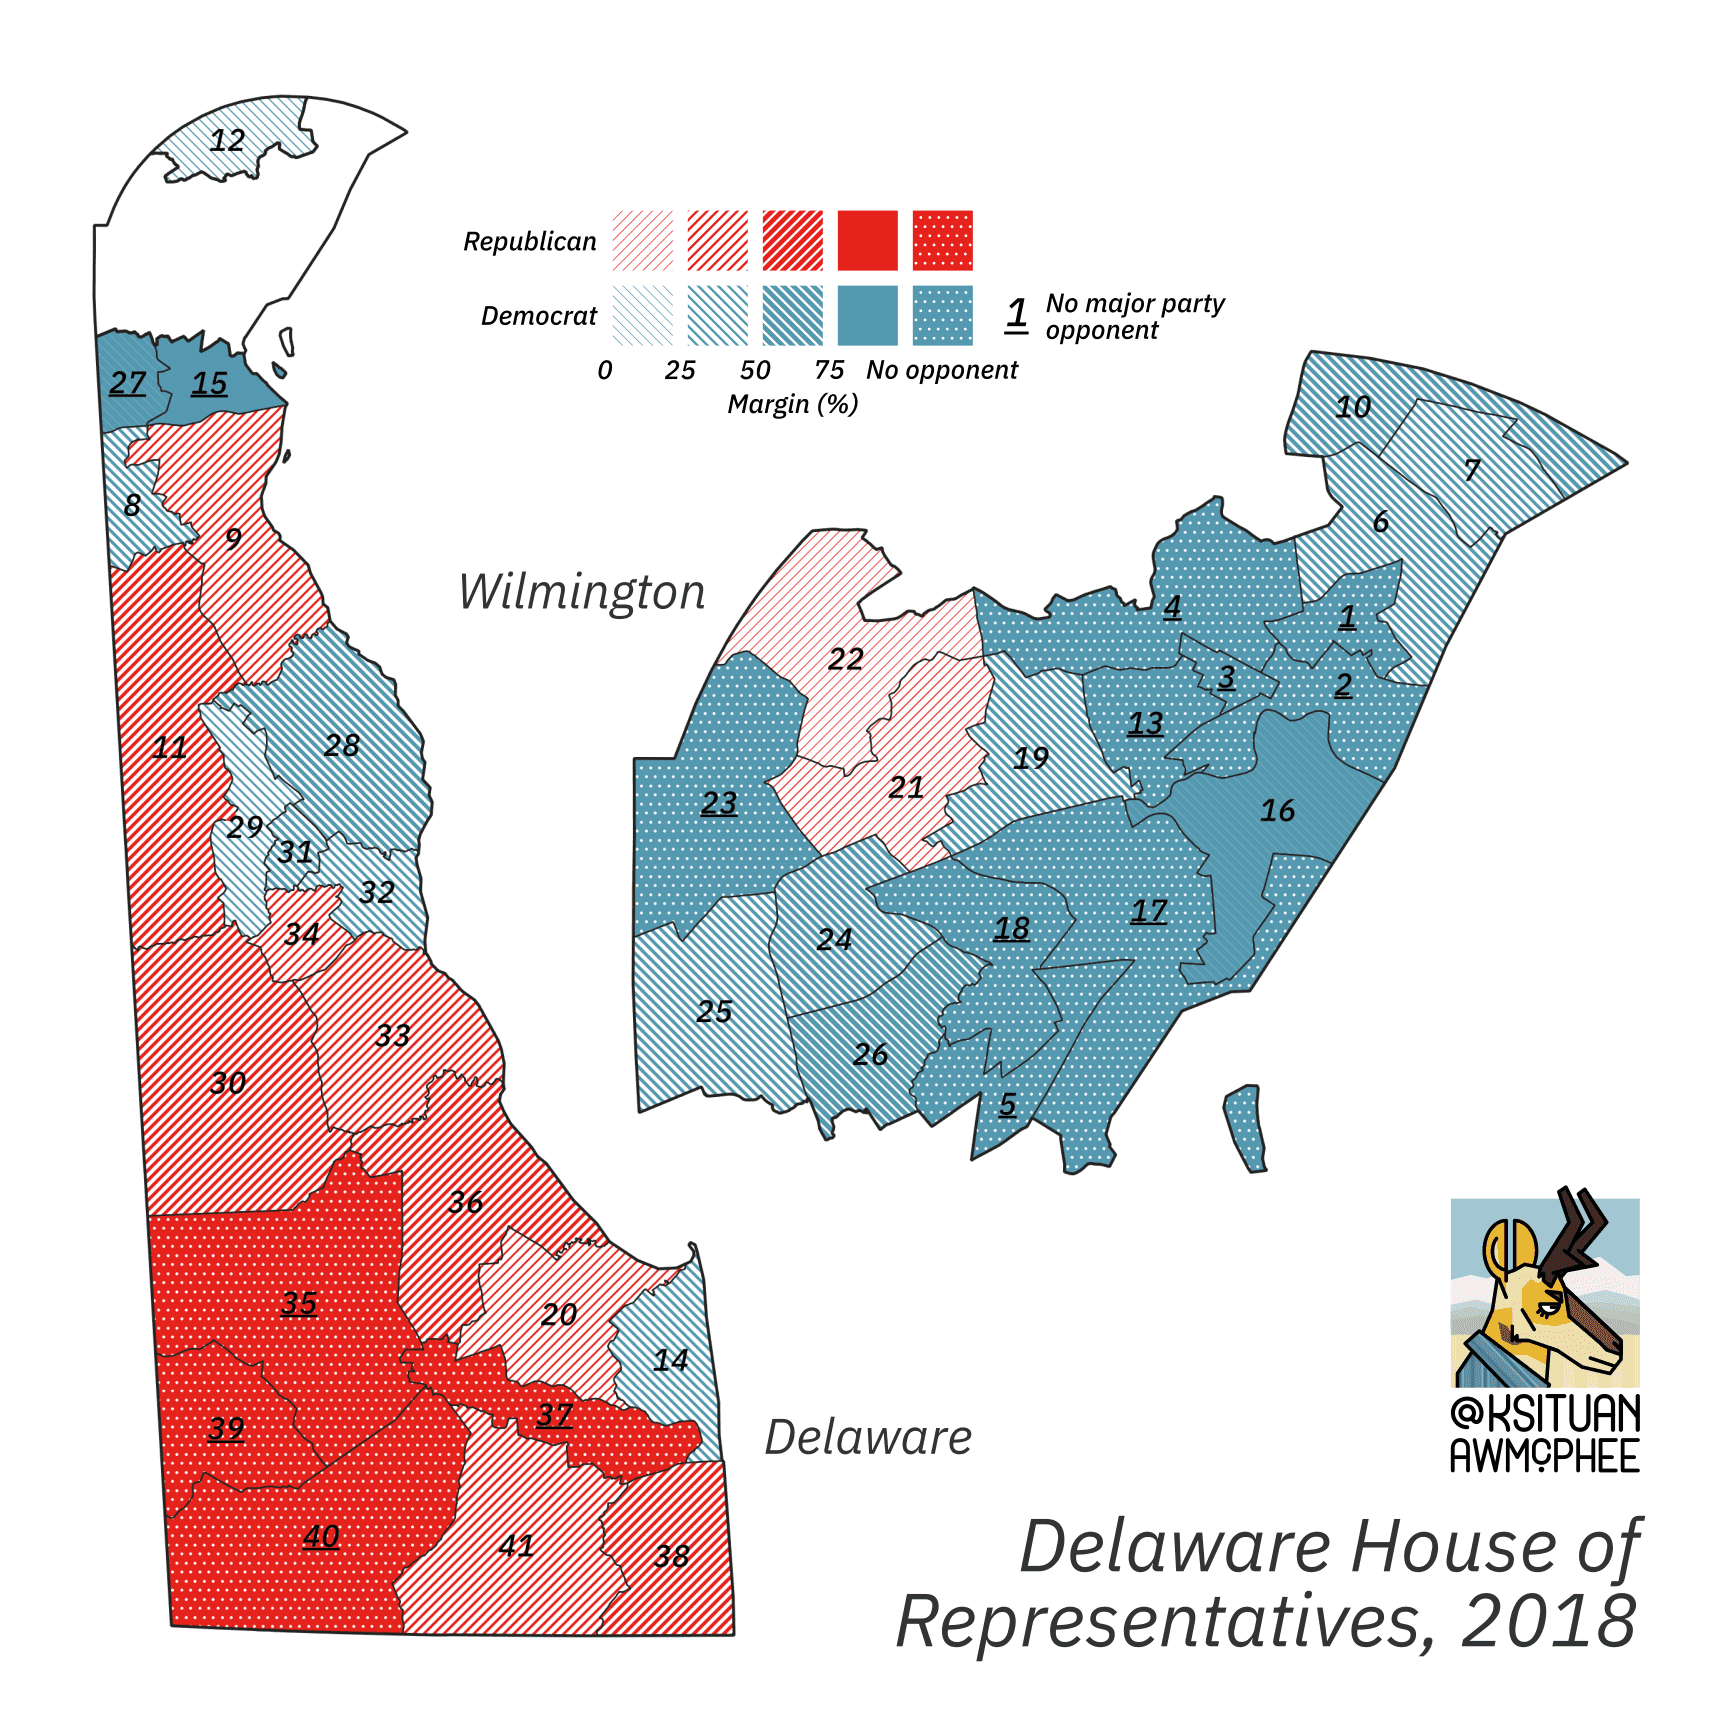 A political map of Delaware.